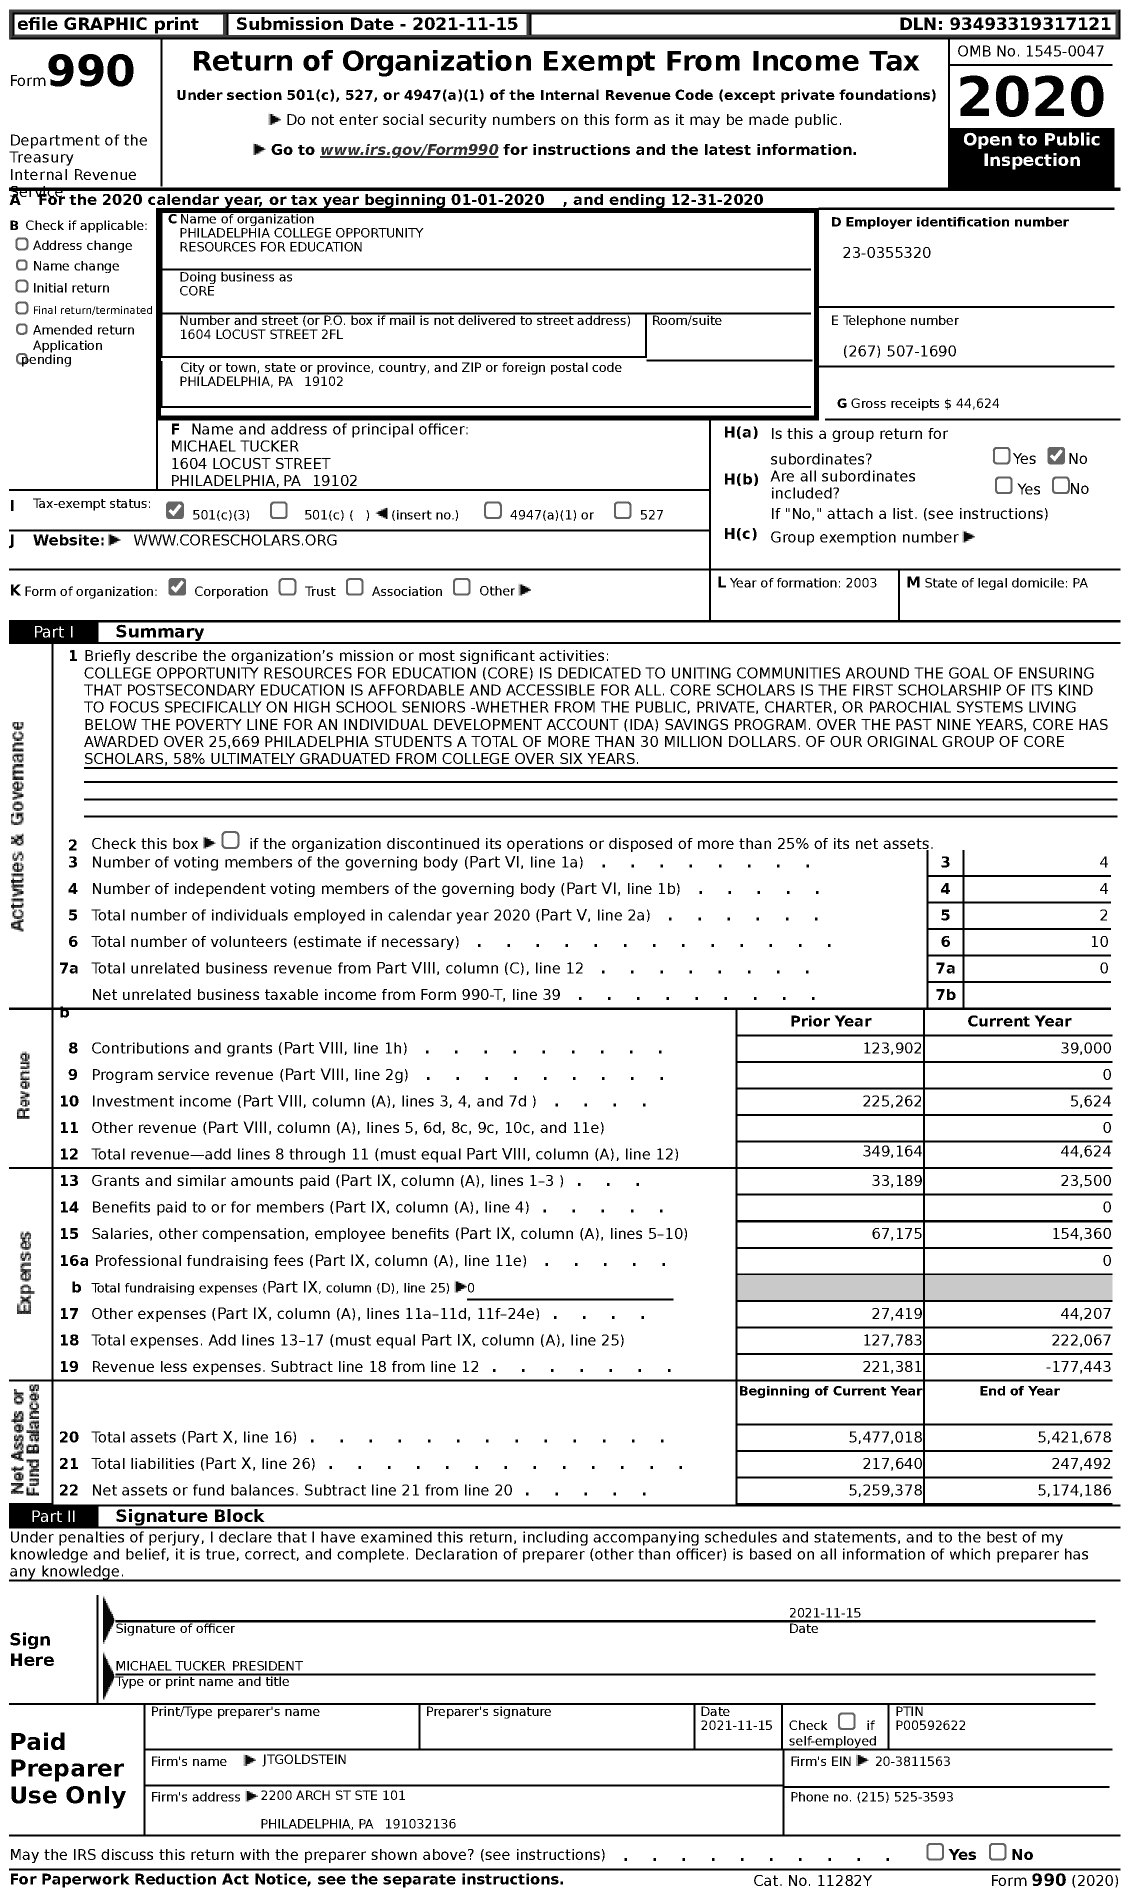 Image of first page of 2020 Form 990 for Philadelphia College Opportunity Resources for Education (CORE)